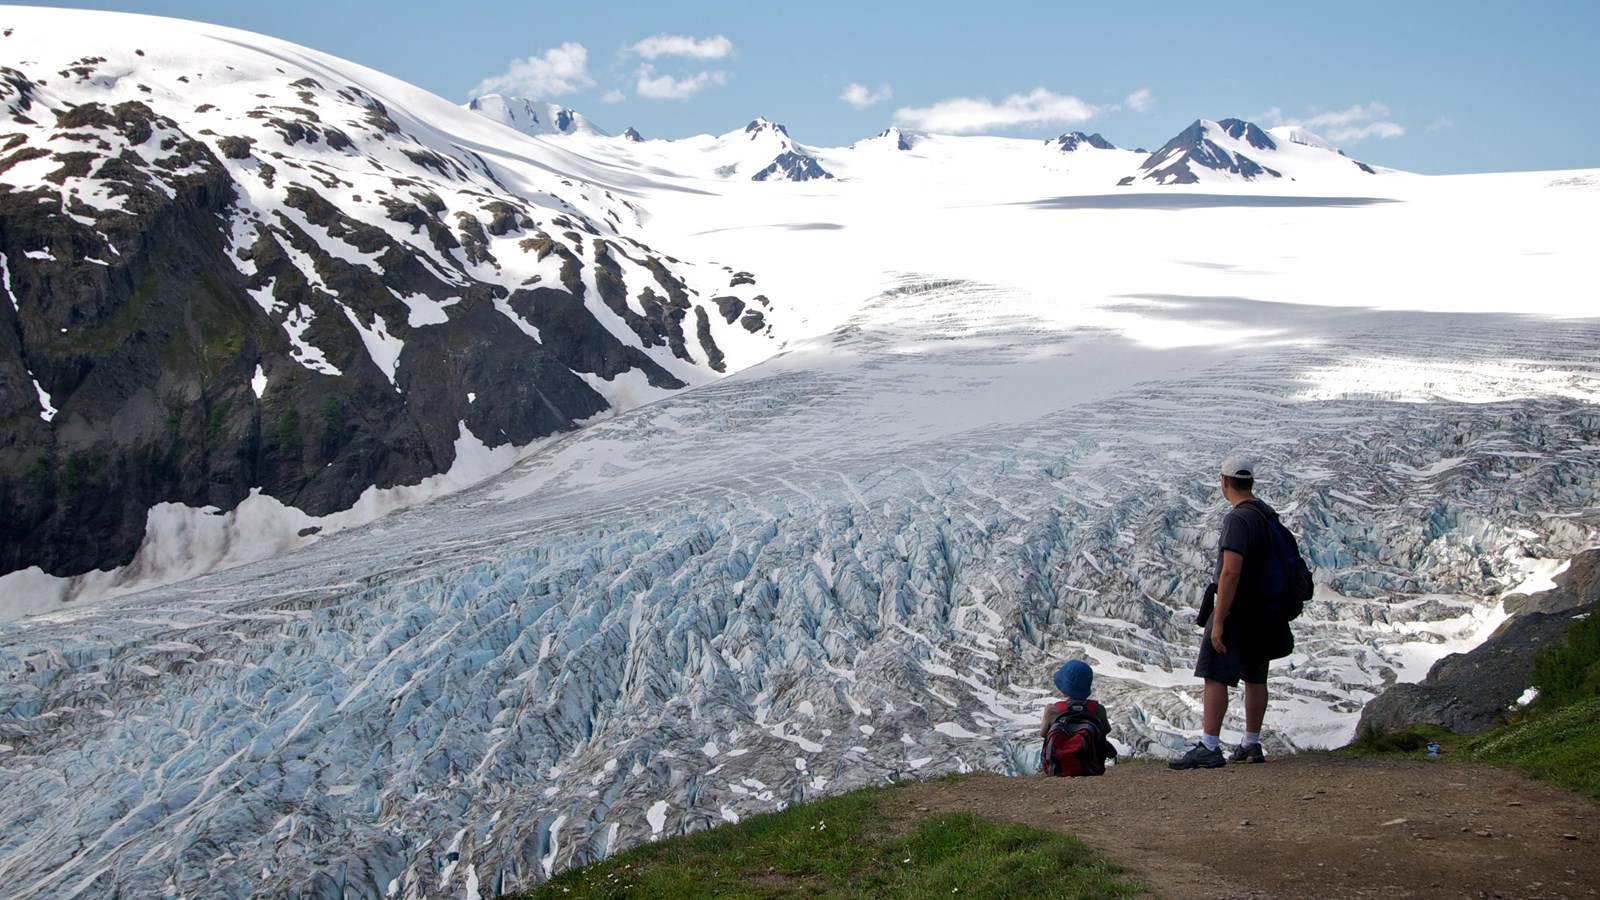 Father and son viewing the Harding Icefield from Top of the Cliffs along the Harding Icefield Trail.